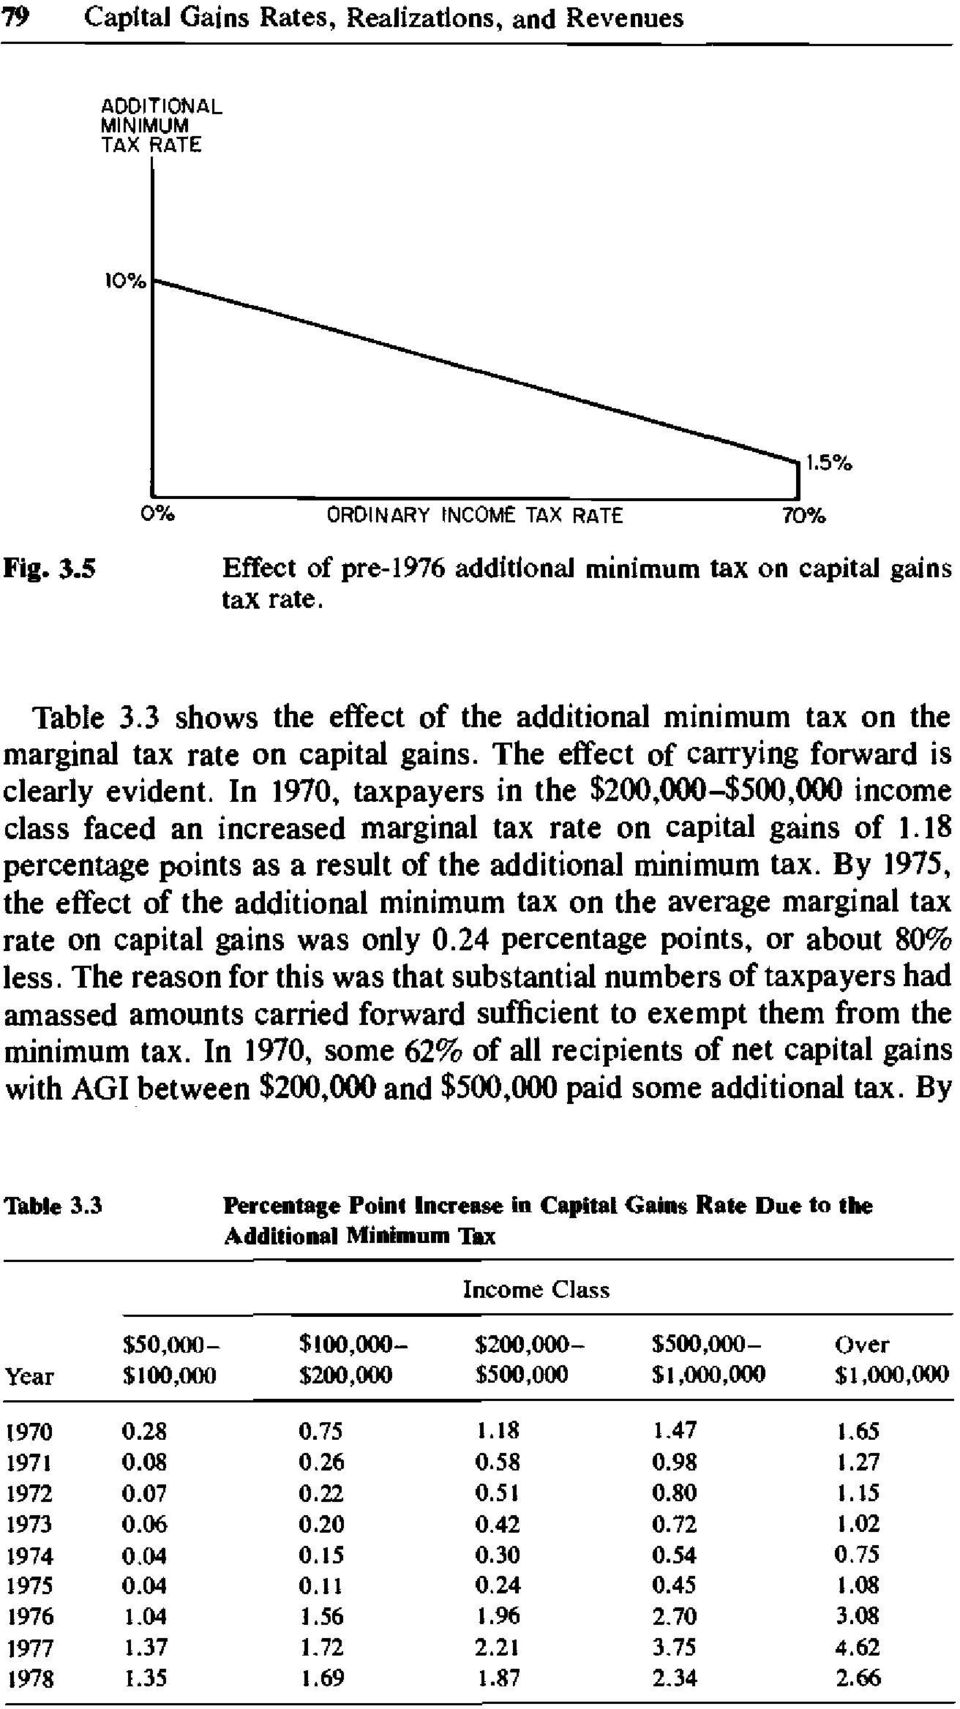 In 1970, taxpayers in the $200,000-$500,000 income class faced an increased marginal tax rate on capital gains of 1.18 percentage points as a result of the additional minimum tax.